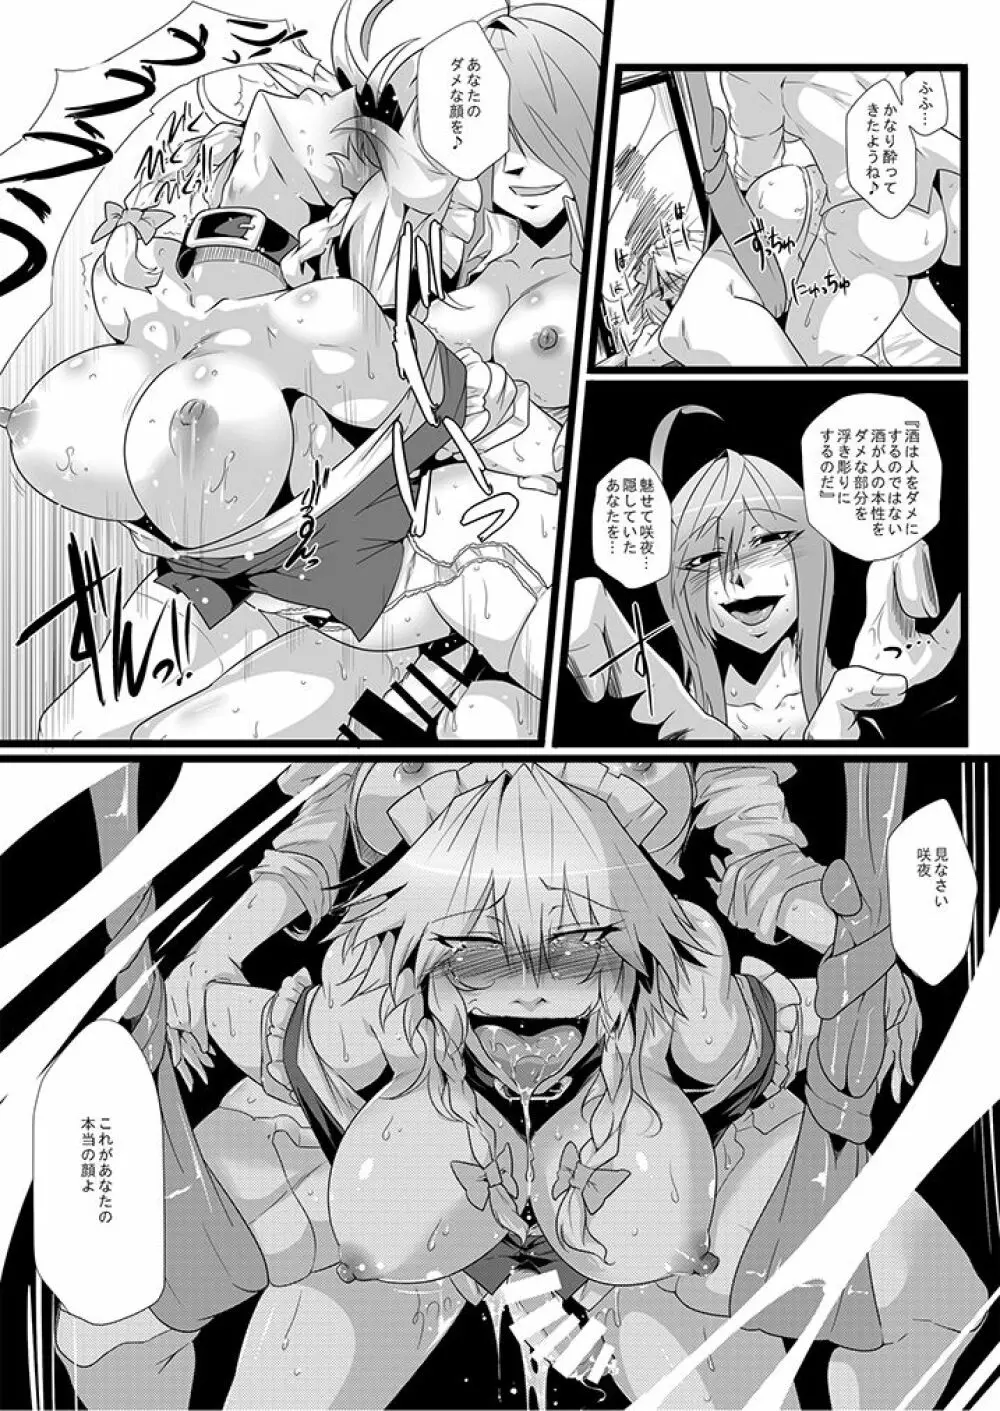 SAKUYA MAID in HEAVEN/ALL IN 1 - page236